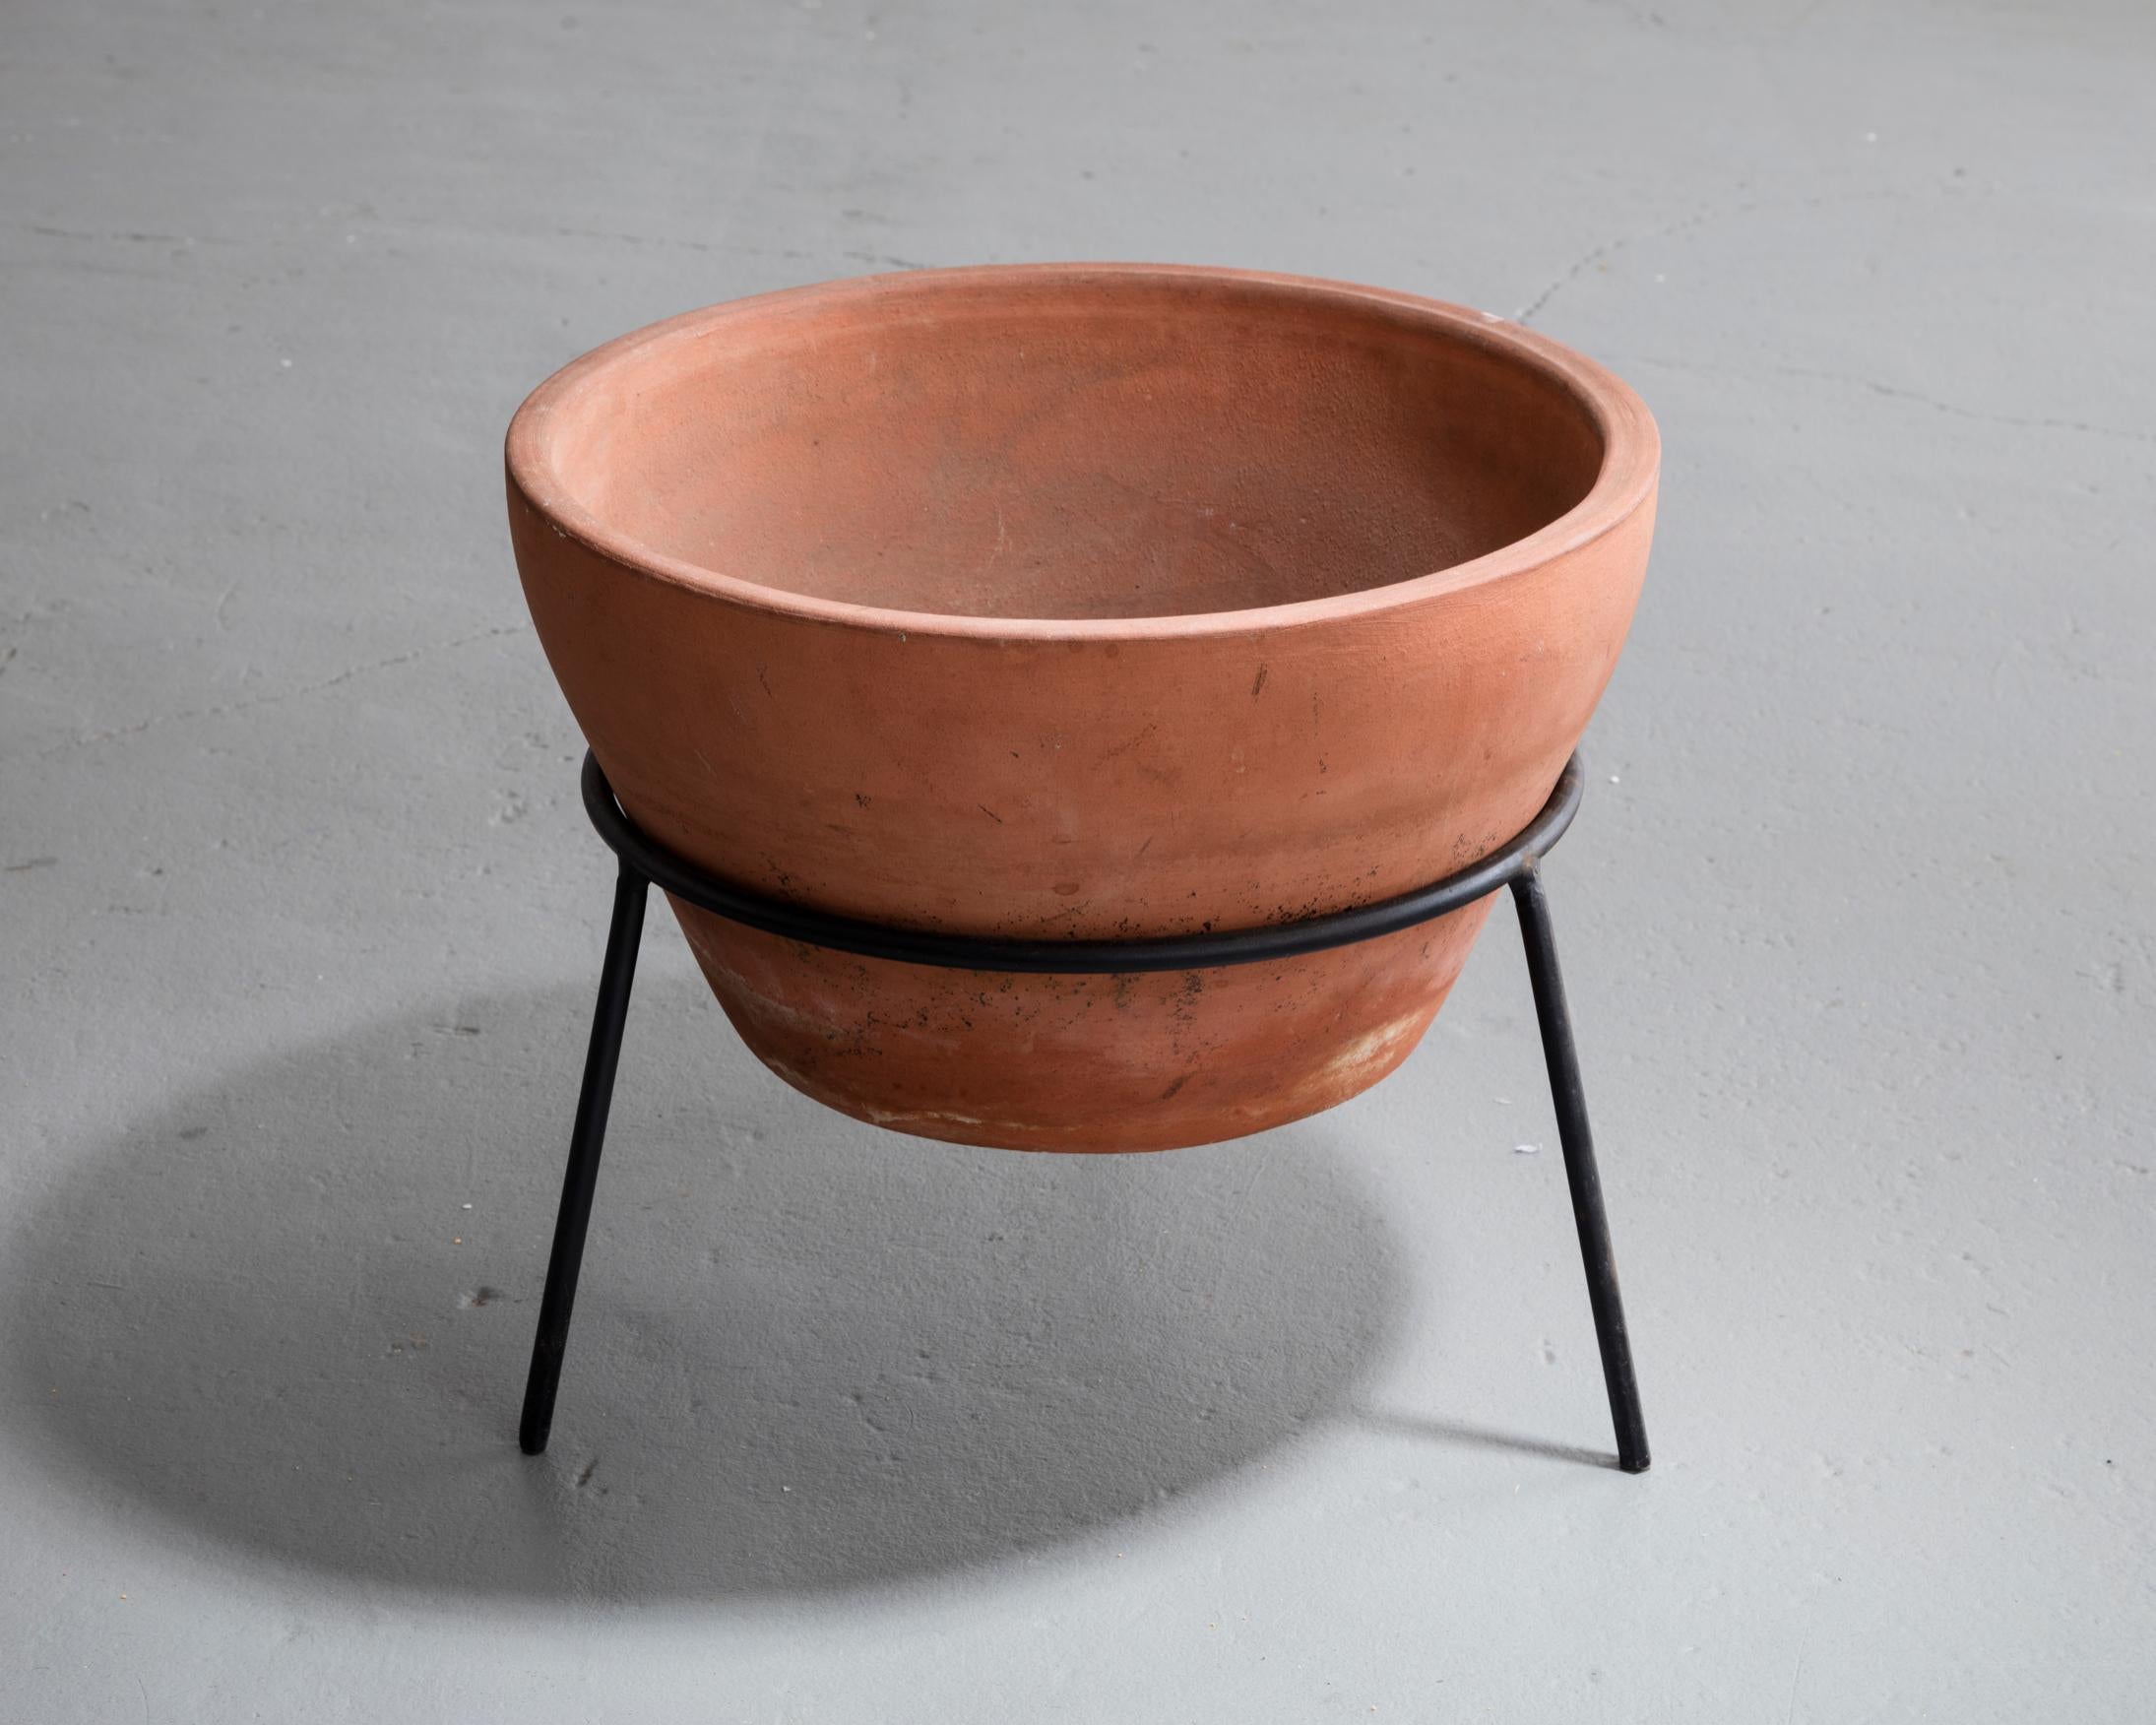 Terra cotta vessel on an iron base. Designed by John Follis for Architectural Pottery, Los Angeles, California, circa 1955.